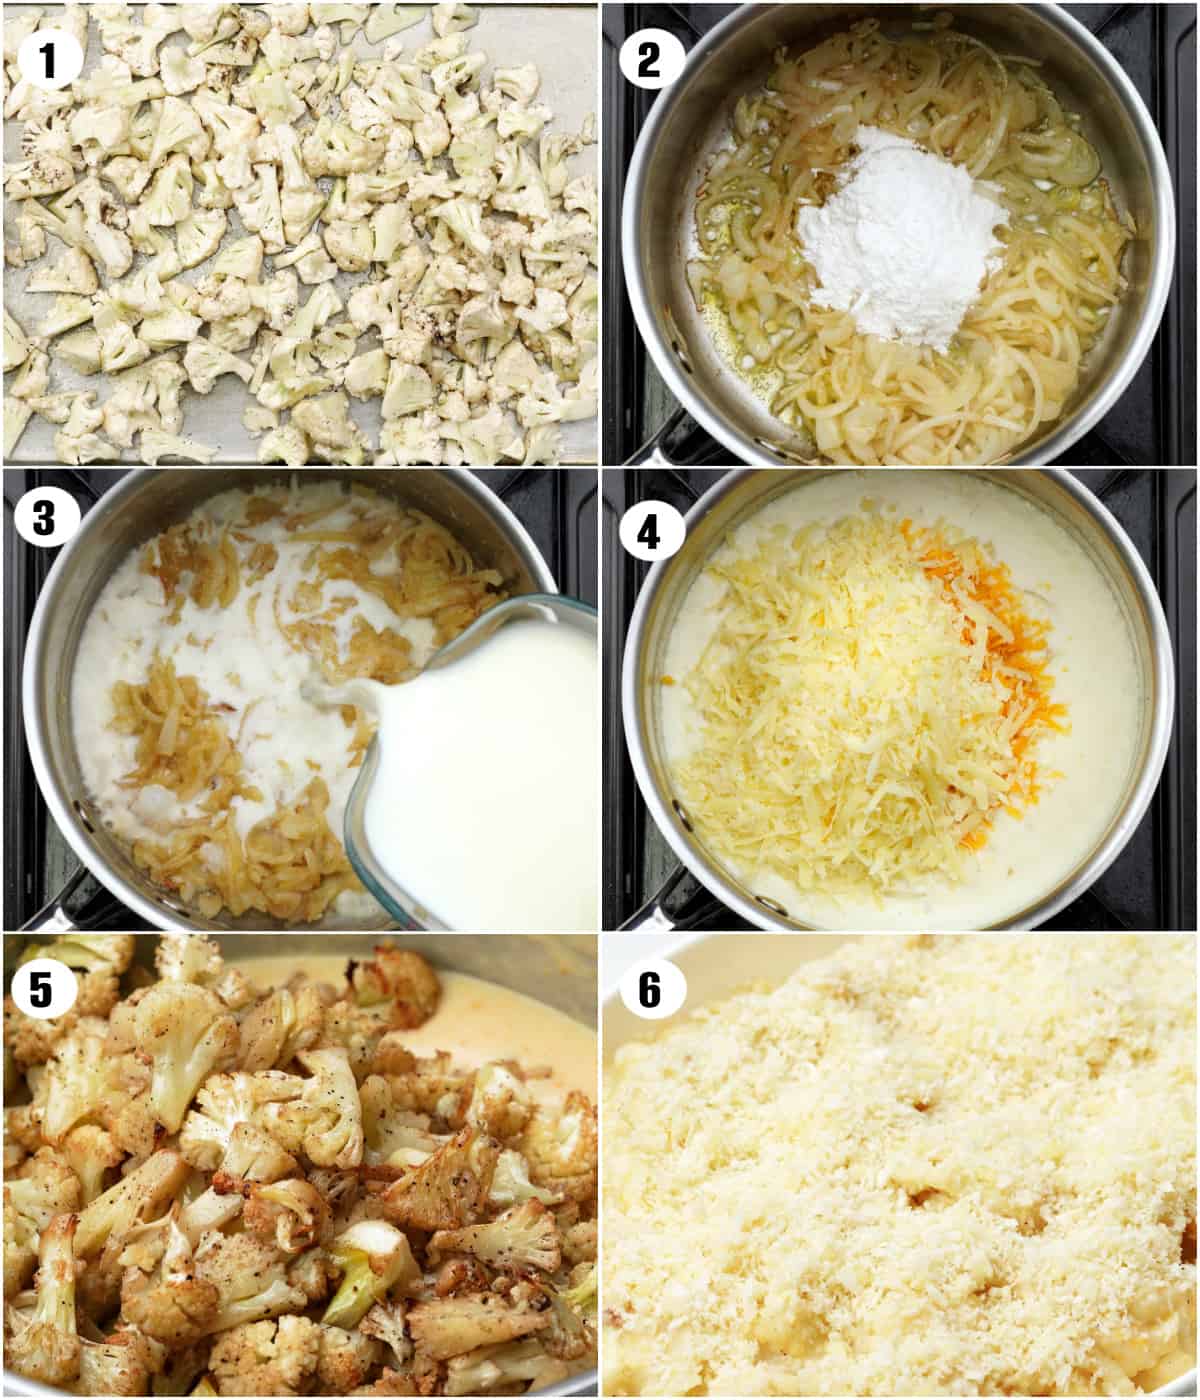 Collage images showing steps to make cauliflower au gratin - Images 1 shows chopped florets, Images2-4 shows how to make a roux and creamy sauce. Image 5 to add baked florets to the sauce and mix to coat. Image 6 shows topping with breadcrumb mix.